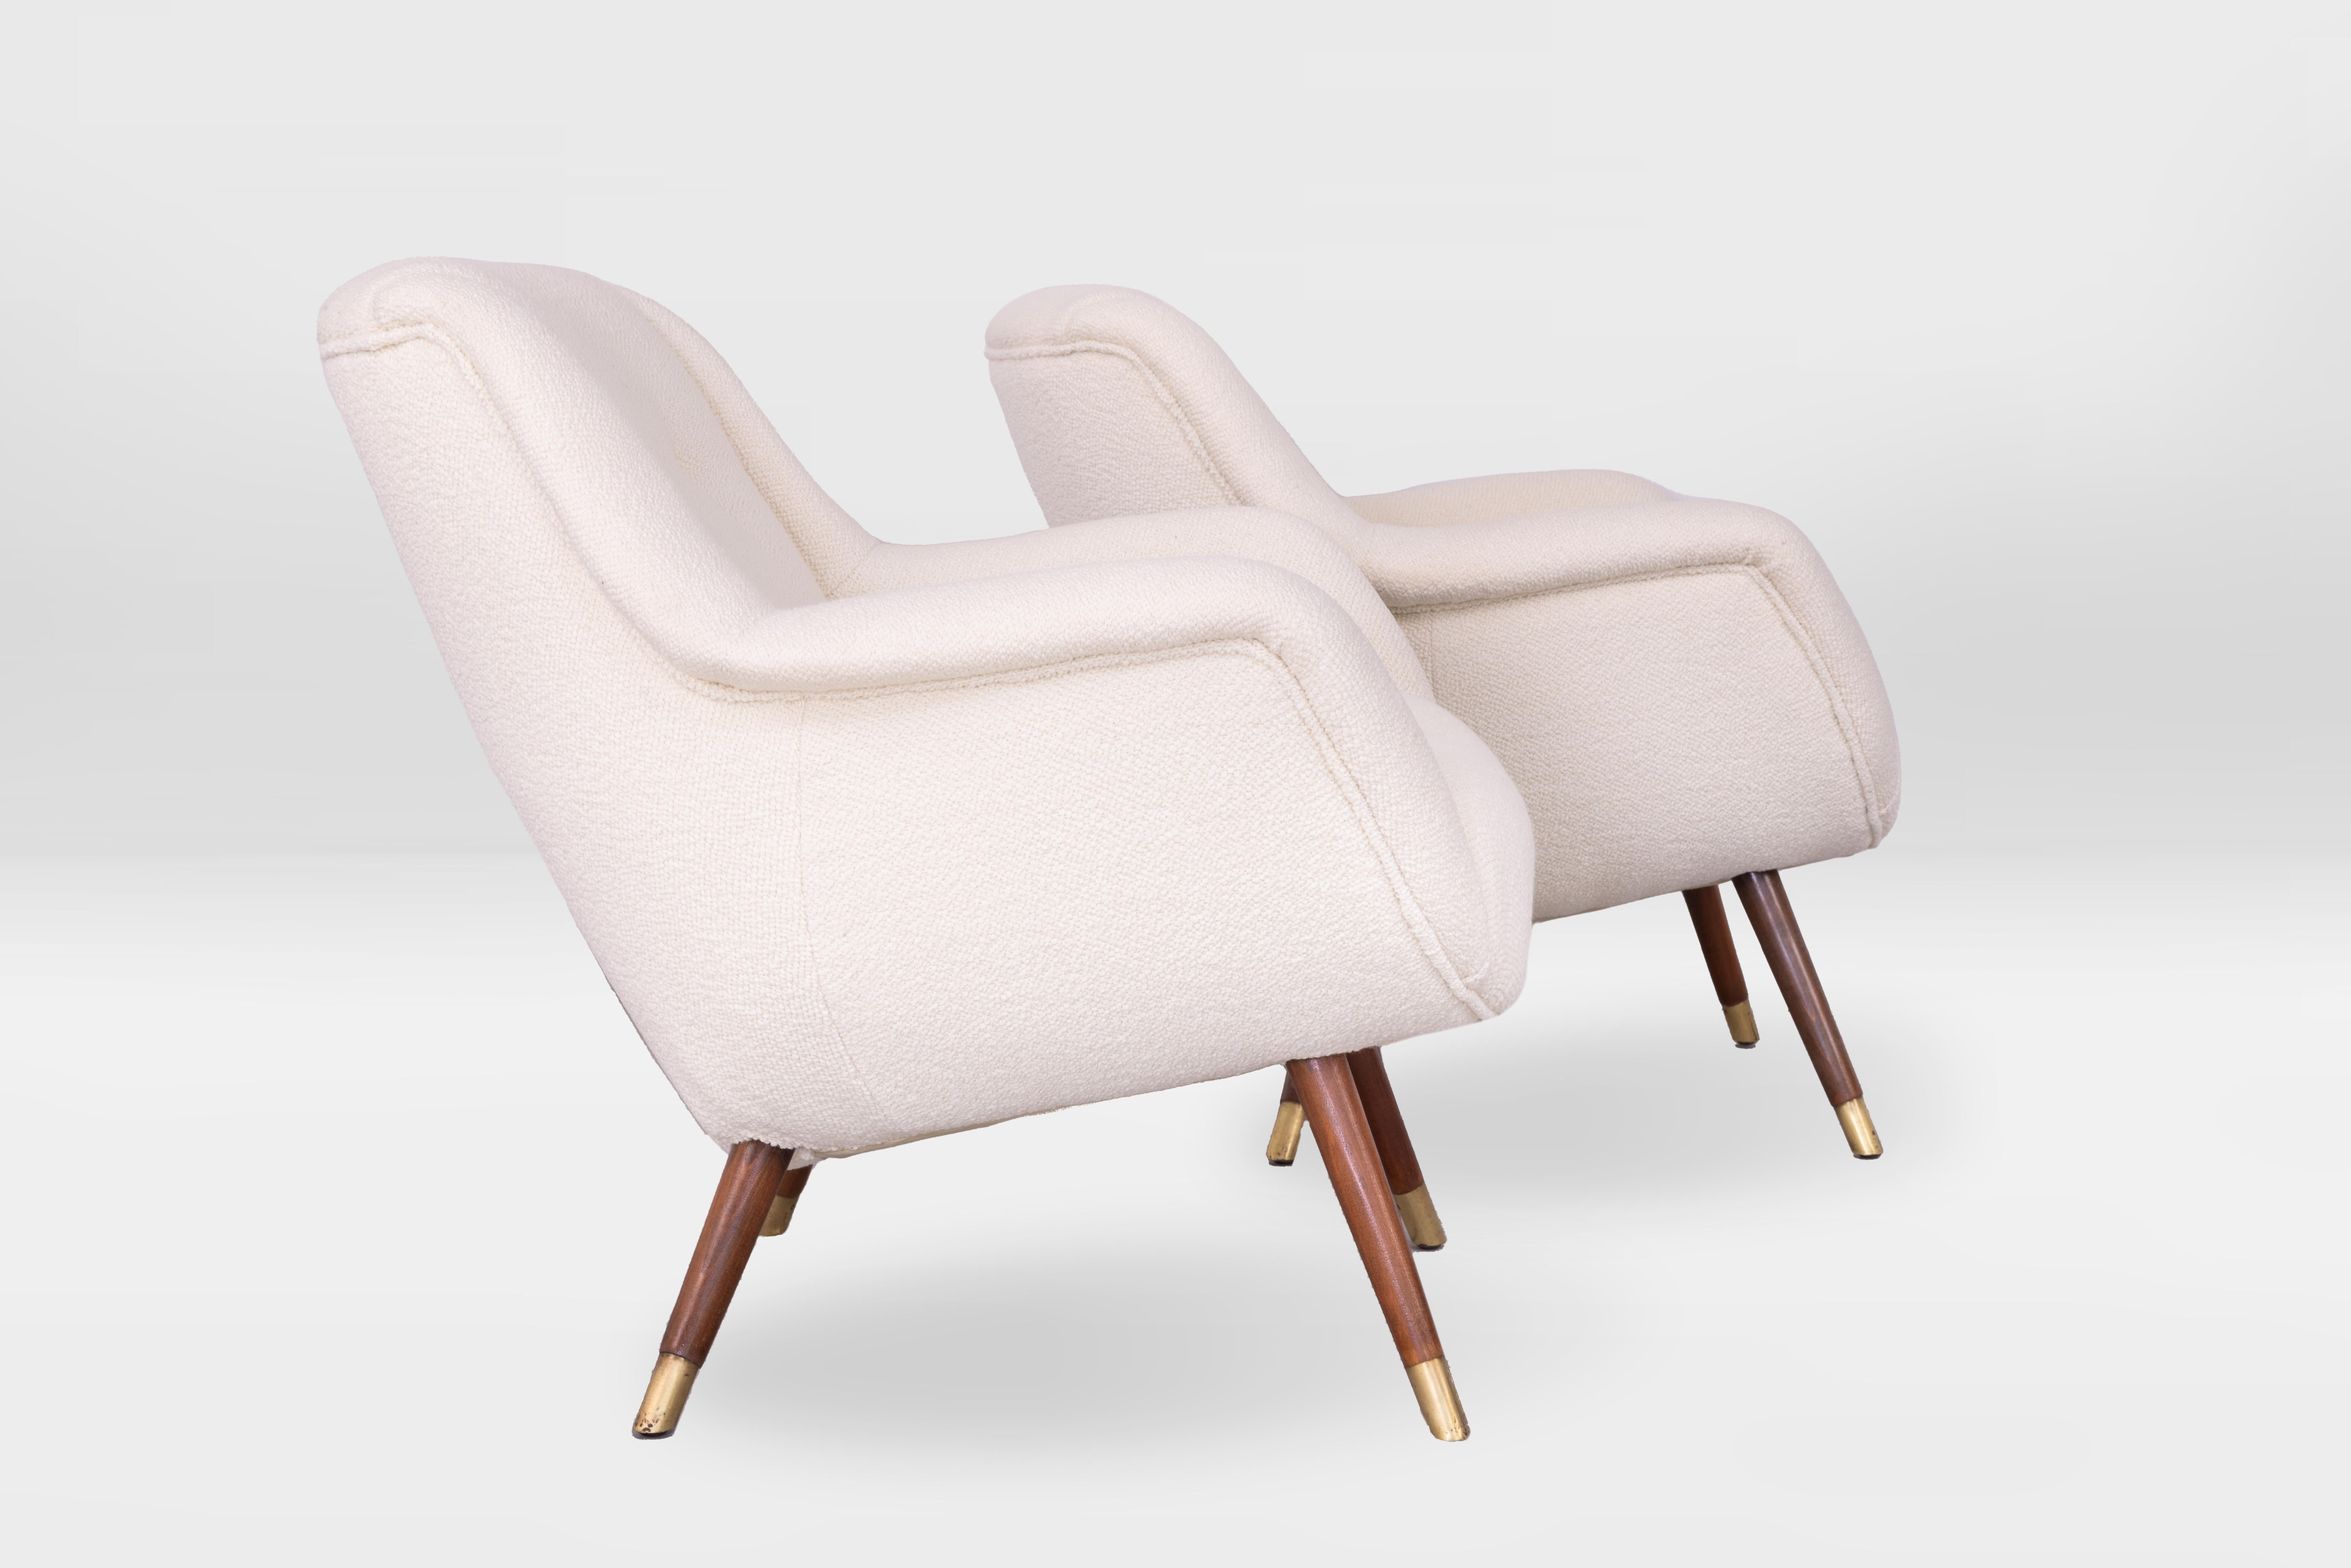 Mid-century egg-shaped armchairs, Belgium 1950, oak and brass legs, newly reupholstered in ivory wool boucle' by Larsen.
  